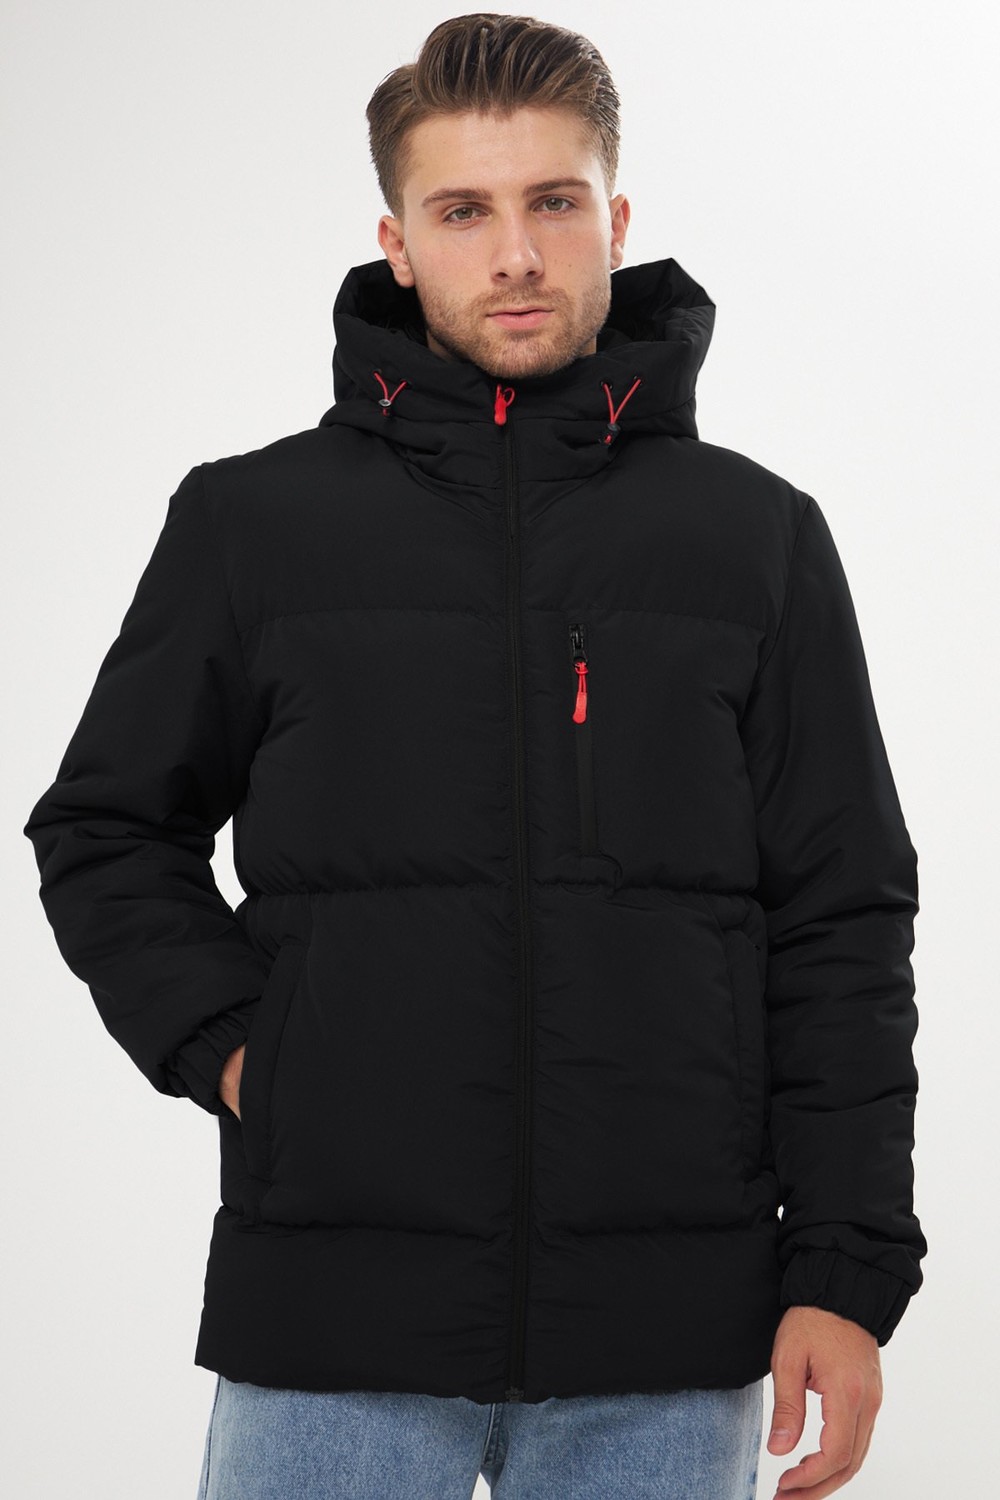 River Club Men's Black Inflatable Winter Sports Jacket With Lined Hood, Waterproof And Windproof.